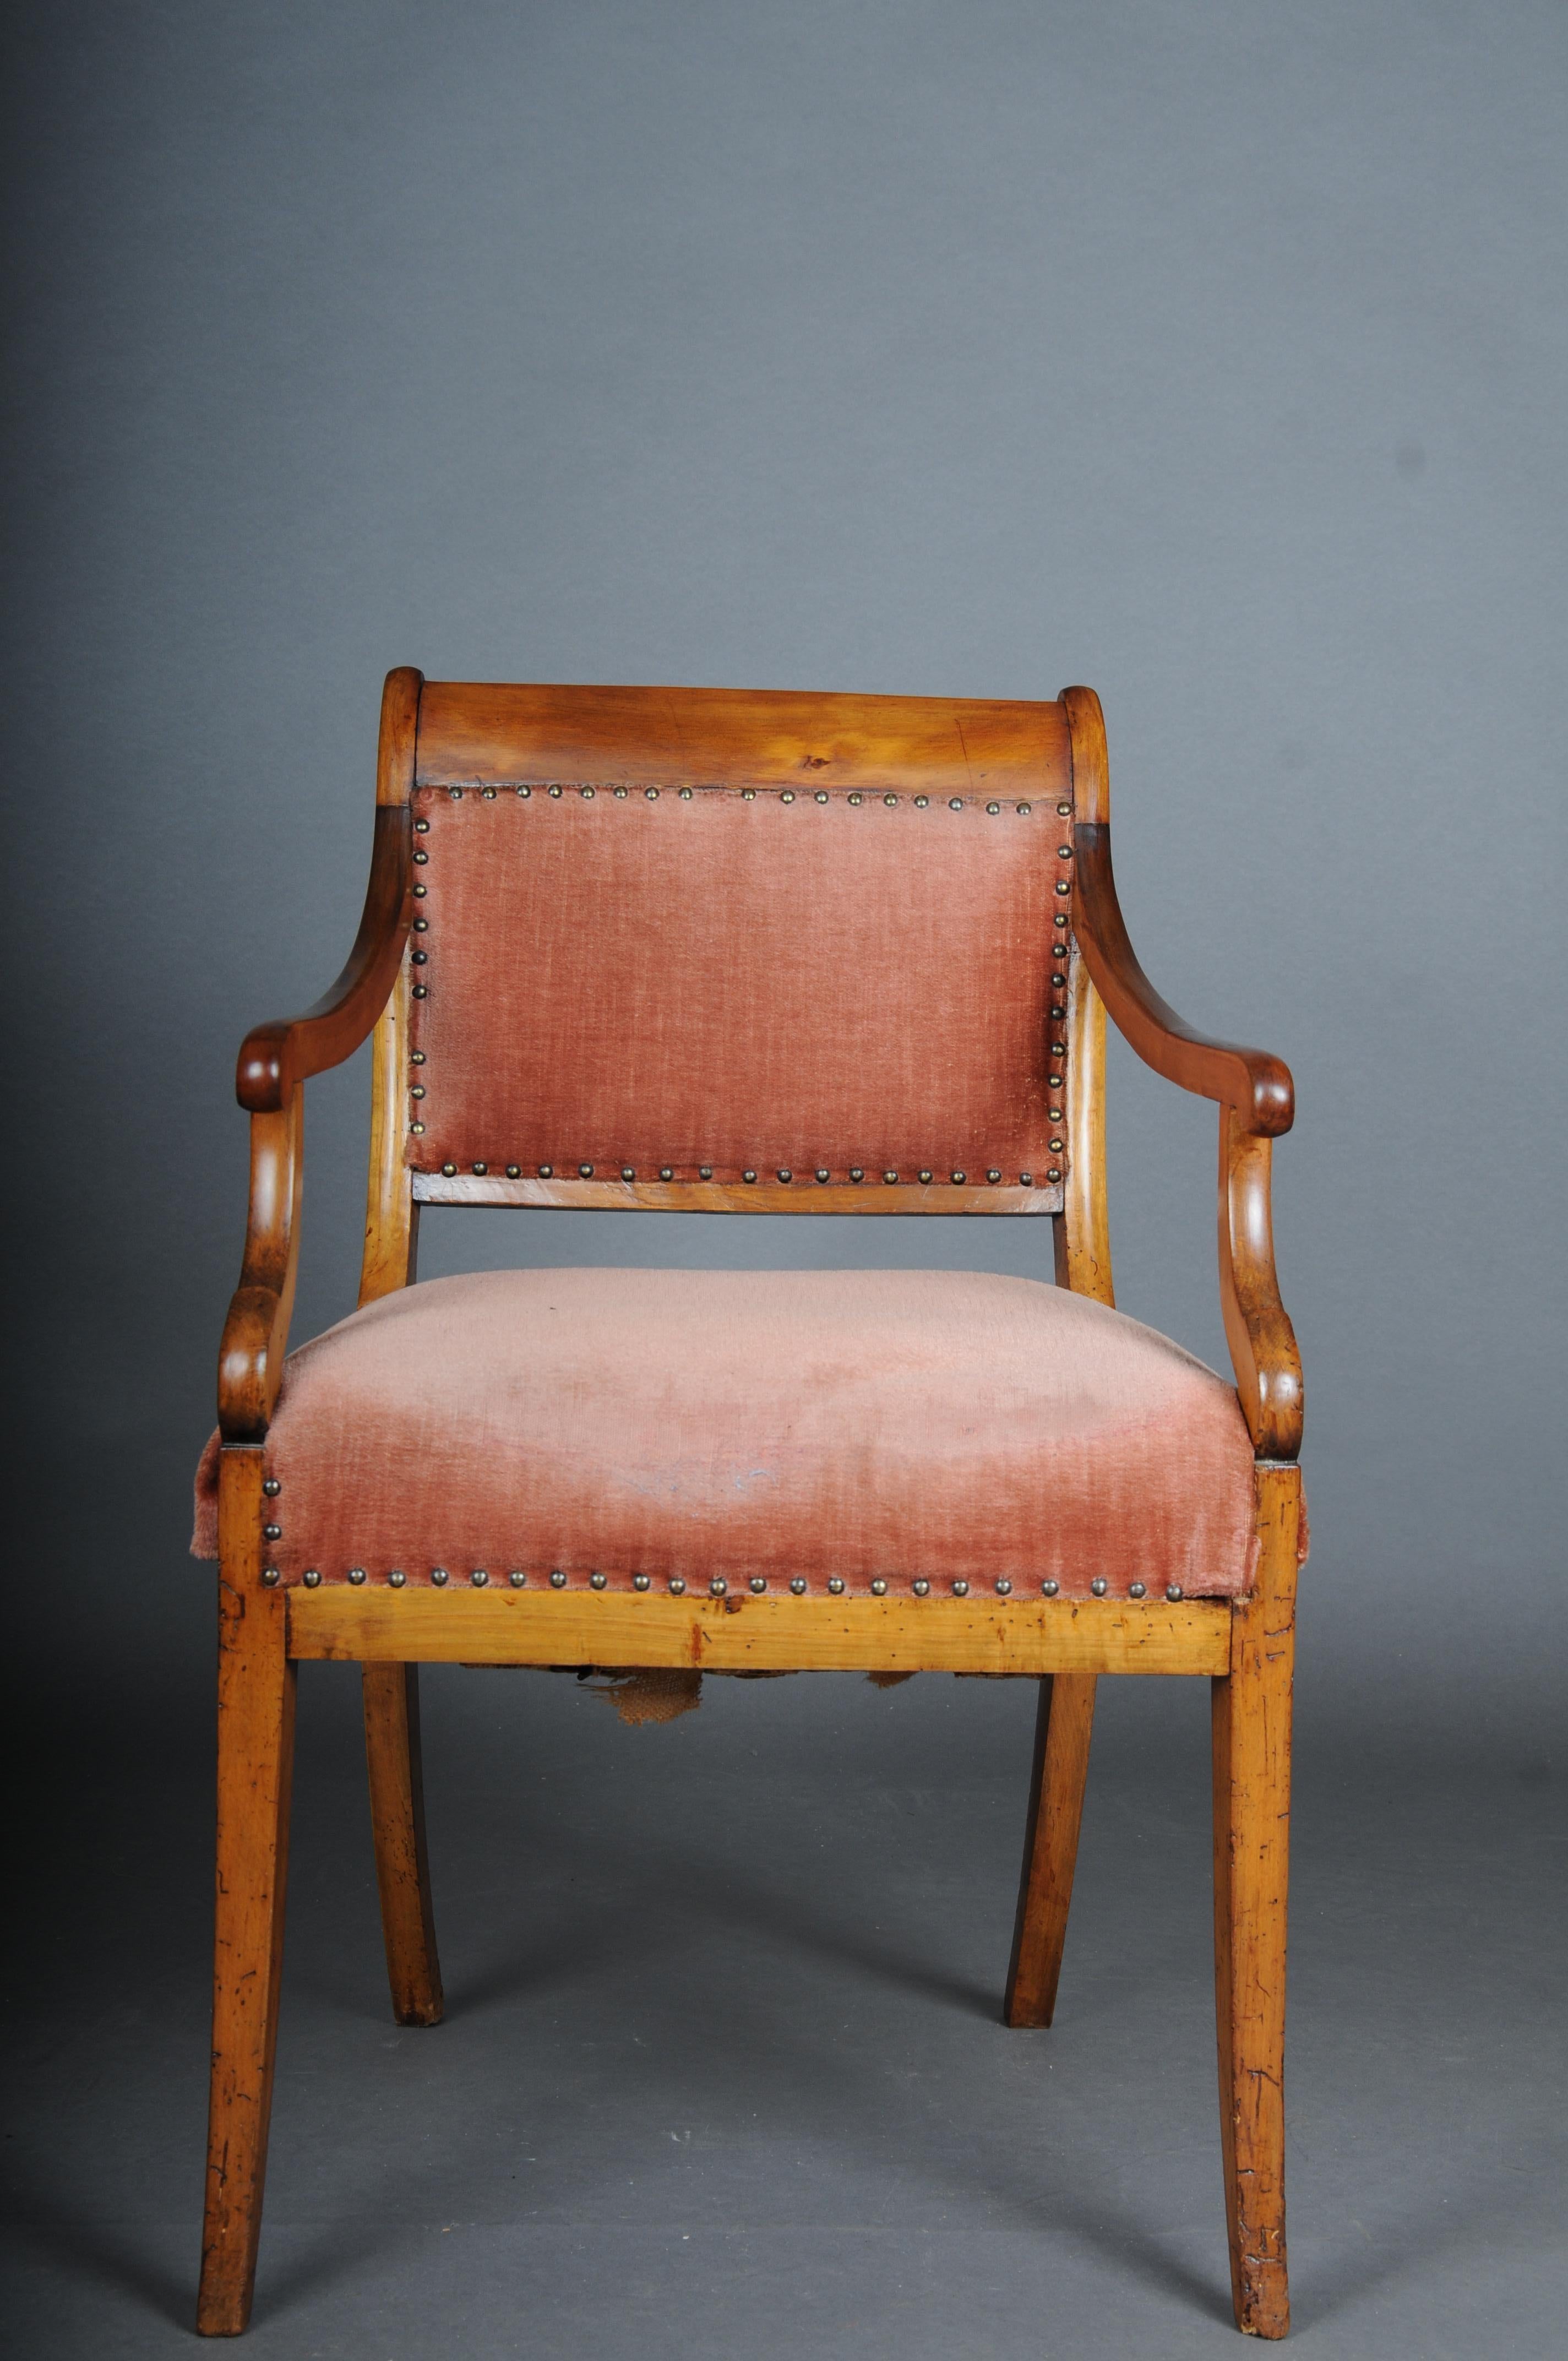 Antique Biedermeier armchair around 1840, birch #

Solid birch body. Back and seat upholstery upholstered with elaborate laced spring floor and covered with fabric. Curved armrests. Slightly curved rear saber legs.
Germany, Biedermeier around 1840